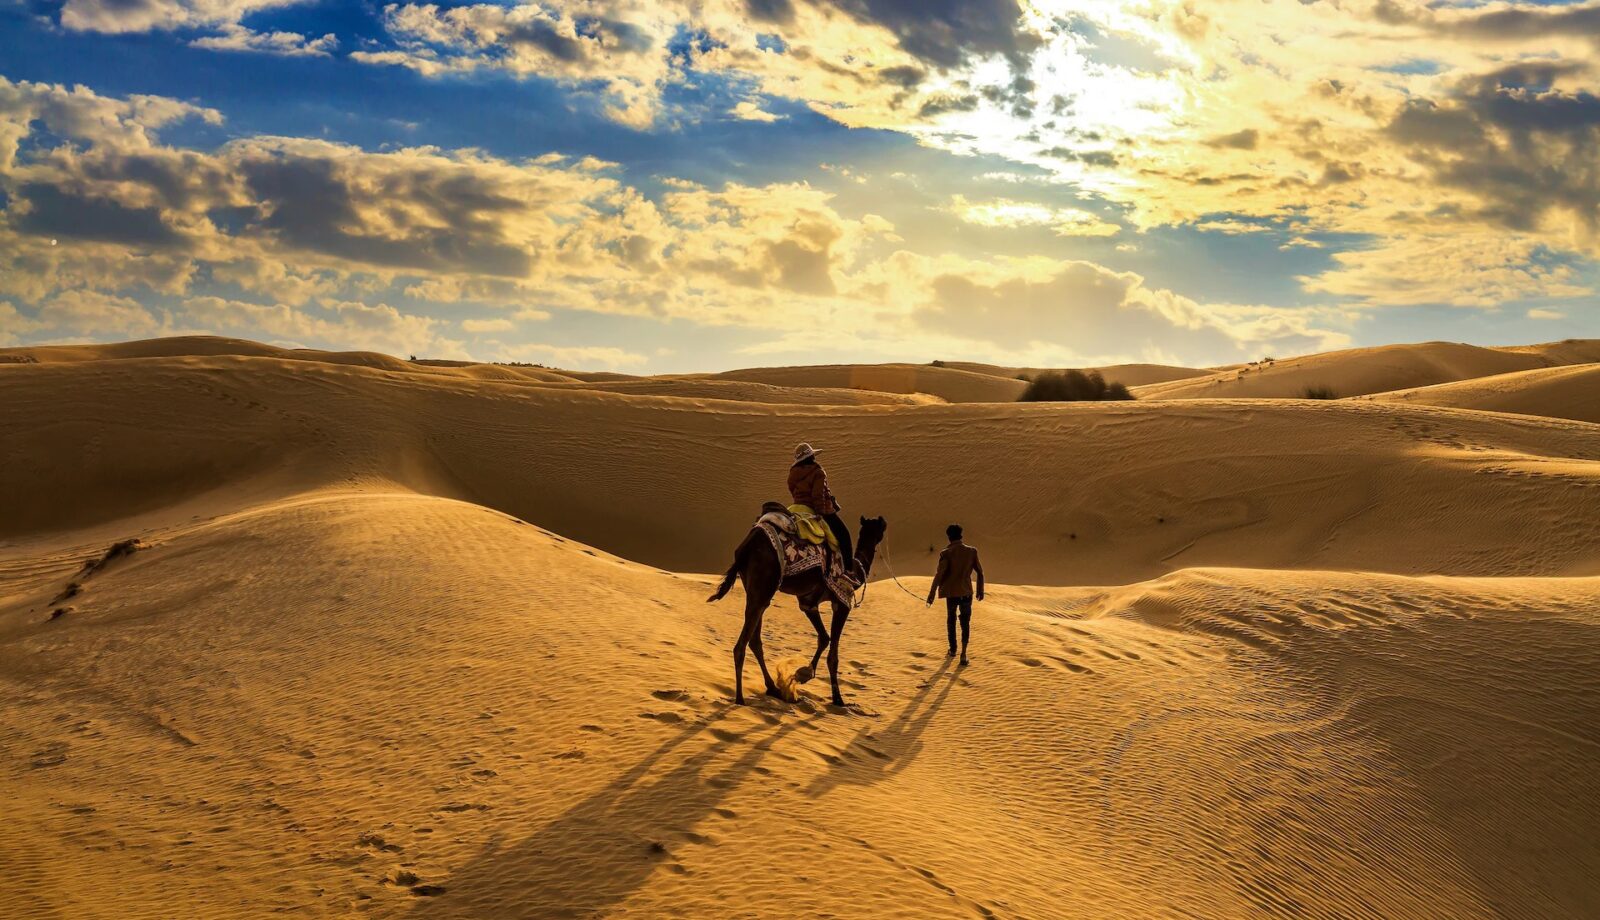 Are You a World Traveler? Test Your Knowledge by Matching These Majestic Natural Sites to Their Countries! Thar Desert, Jaisalmer, India